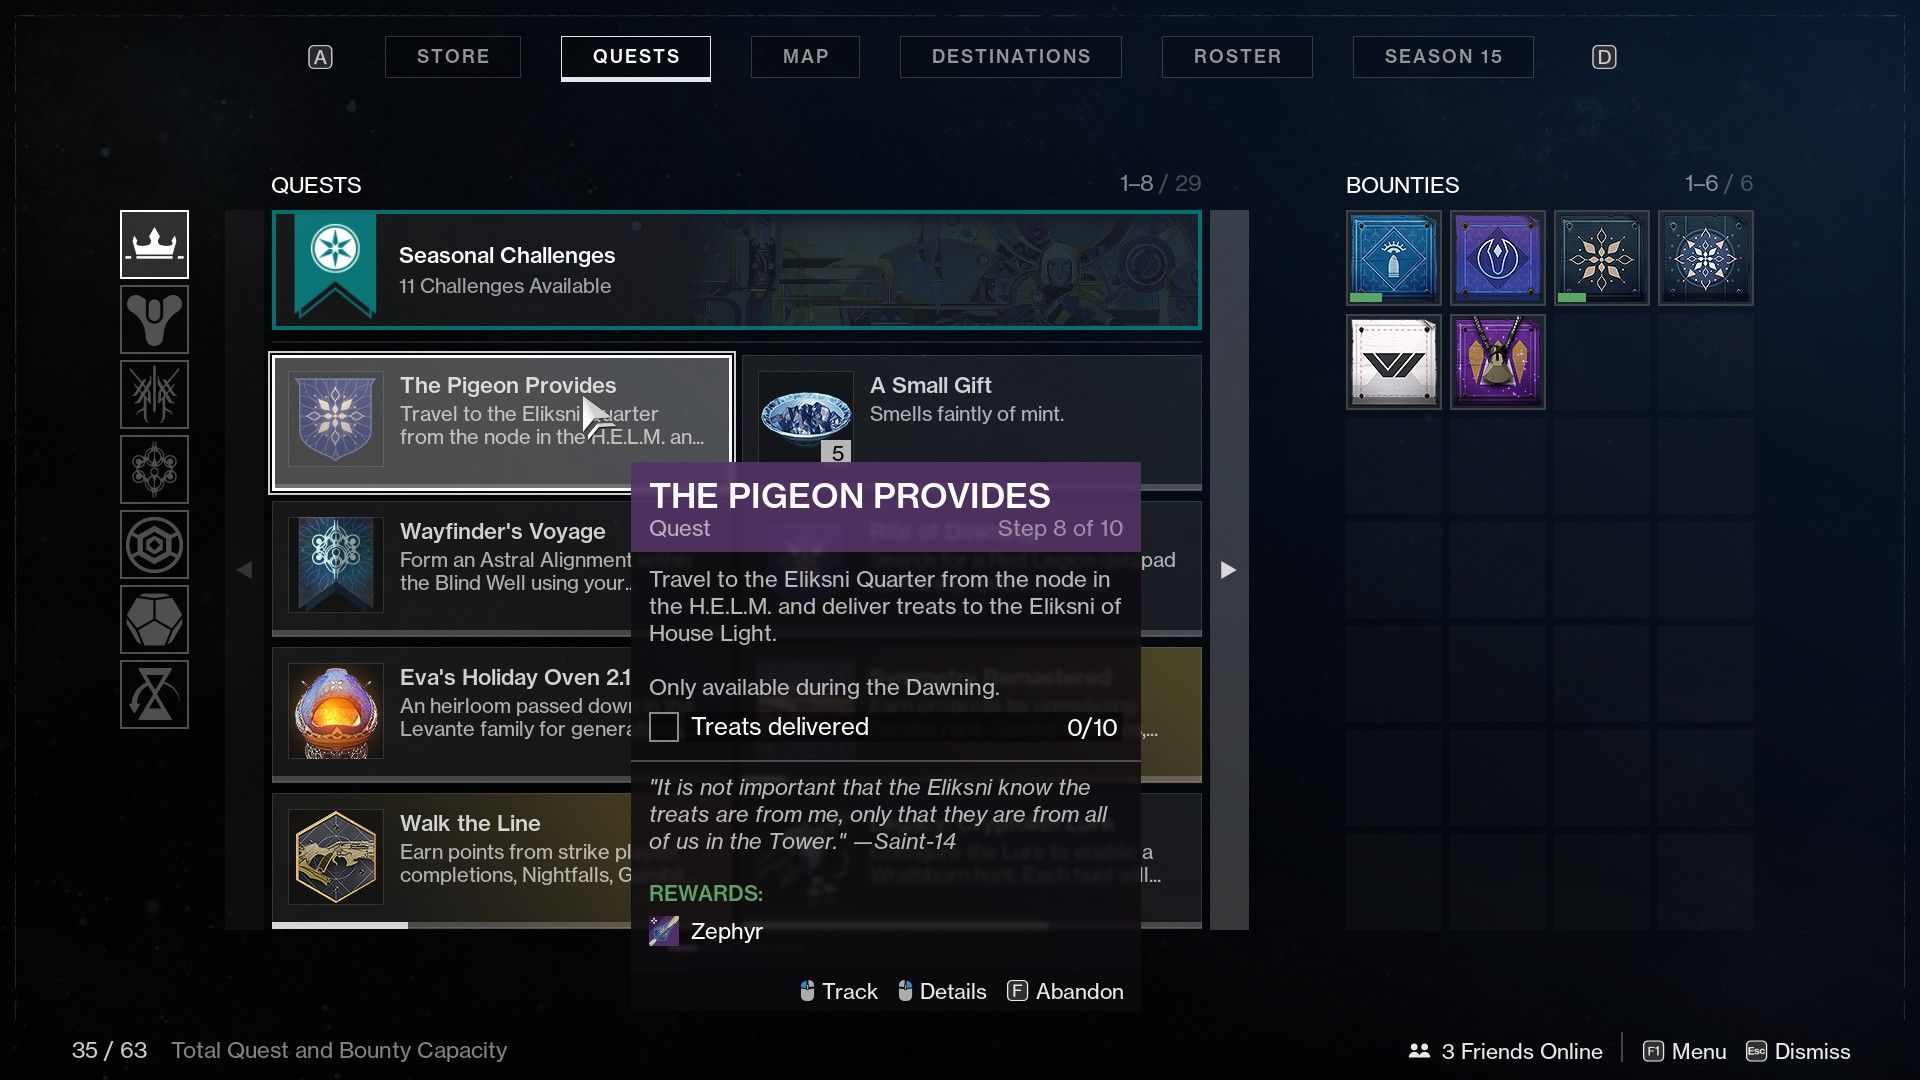 Destiny 2 Dawning 2021: How to Complete The Pigeon Provides Quest